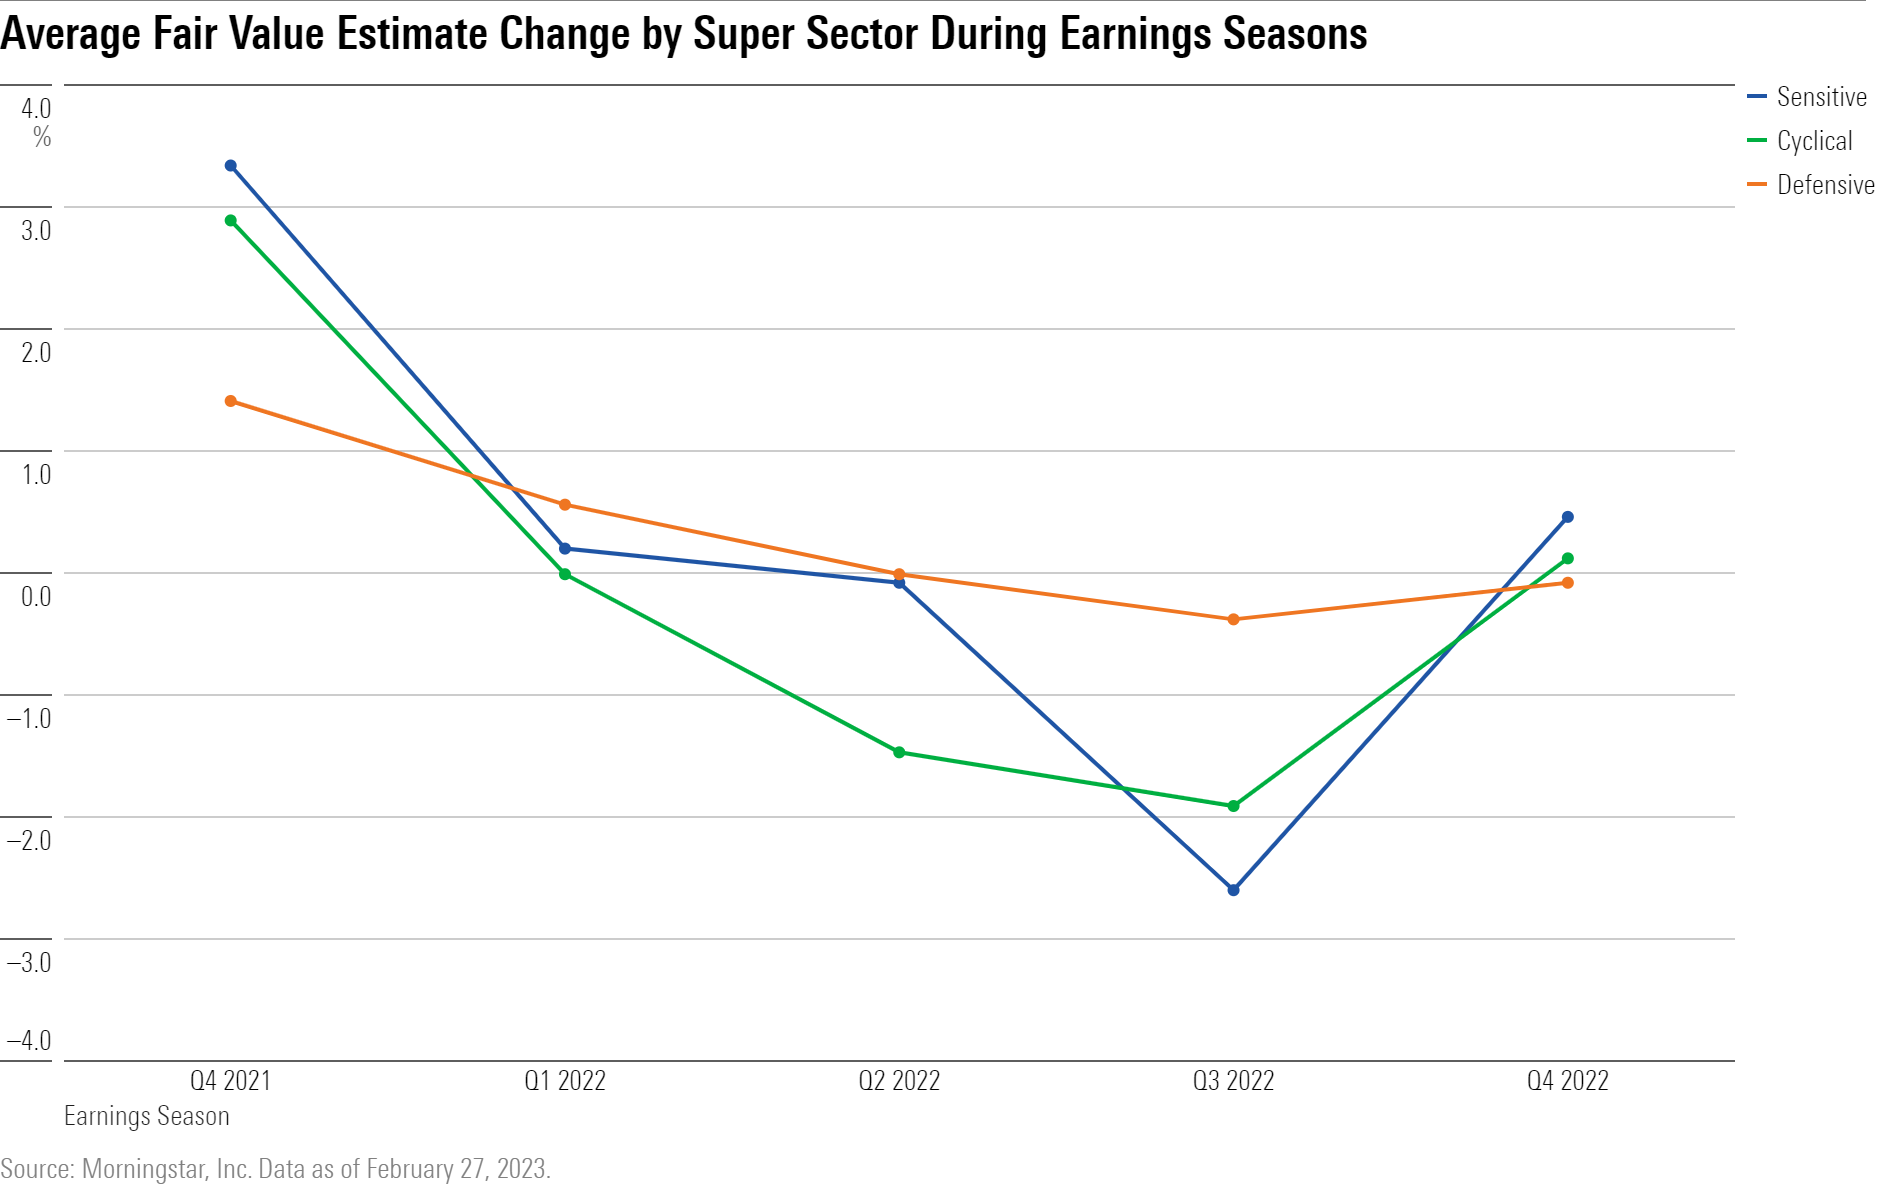 A line chart showing the average fair value estimate change during each quarterly earnings season between Q4 2021 and 2022.